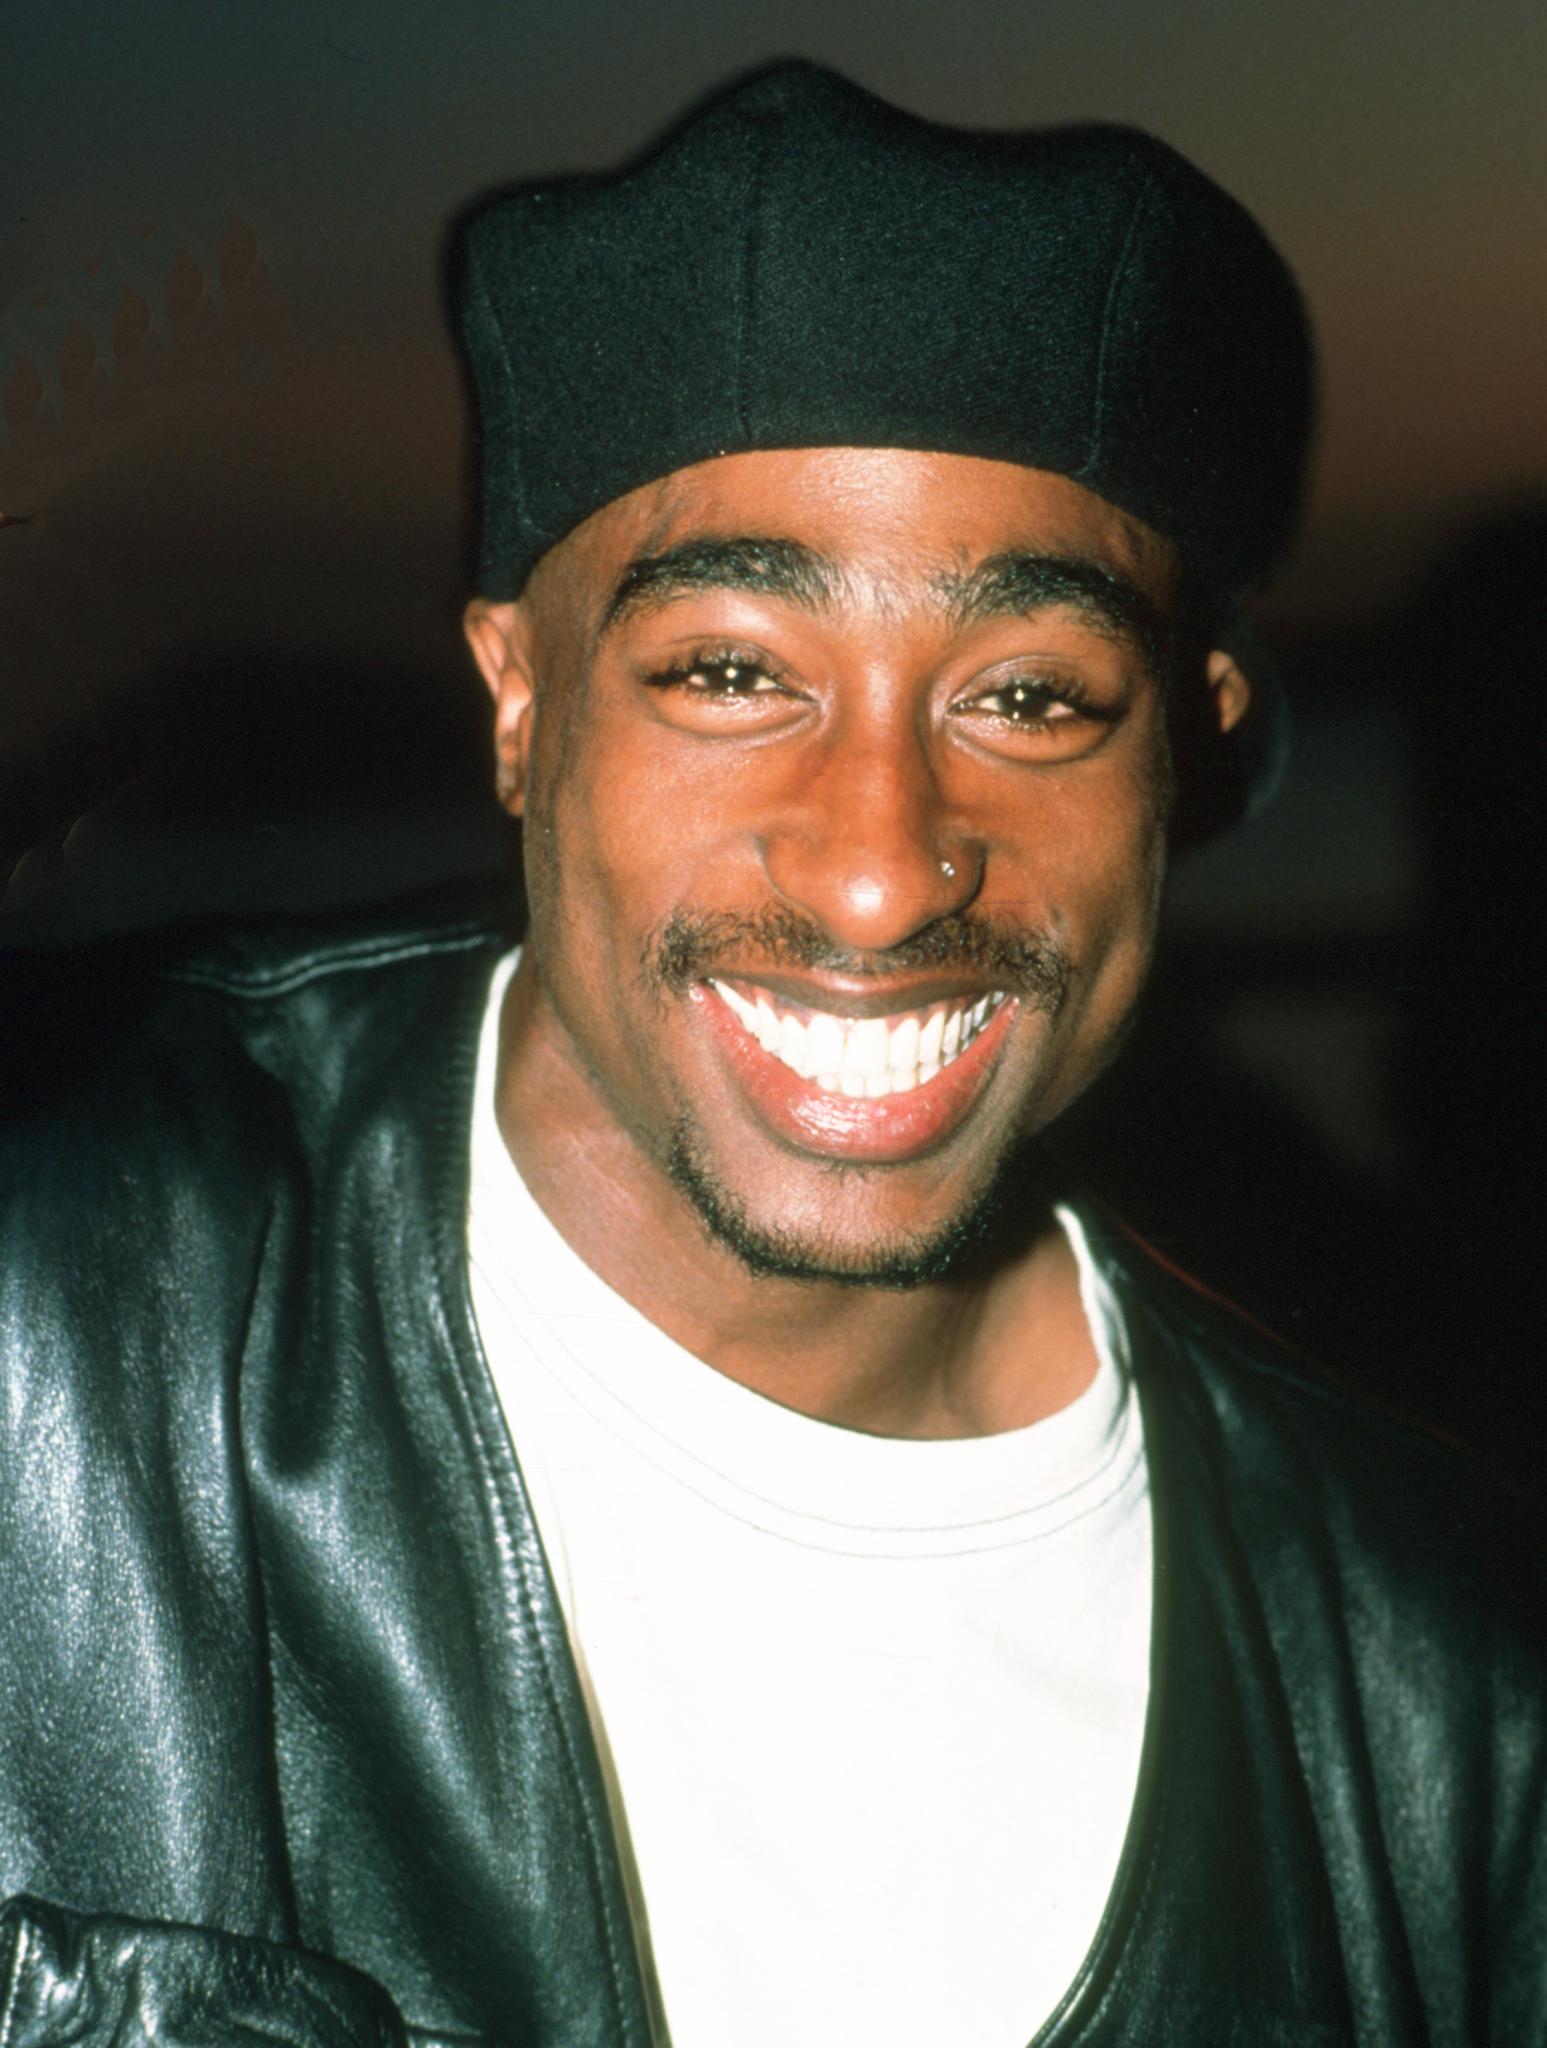 Highly Anticipated Tupac Biopic ‘All Eyez On Me’ Finally Gets Release Date